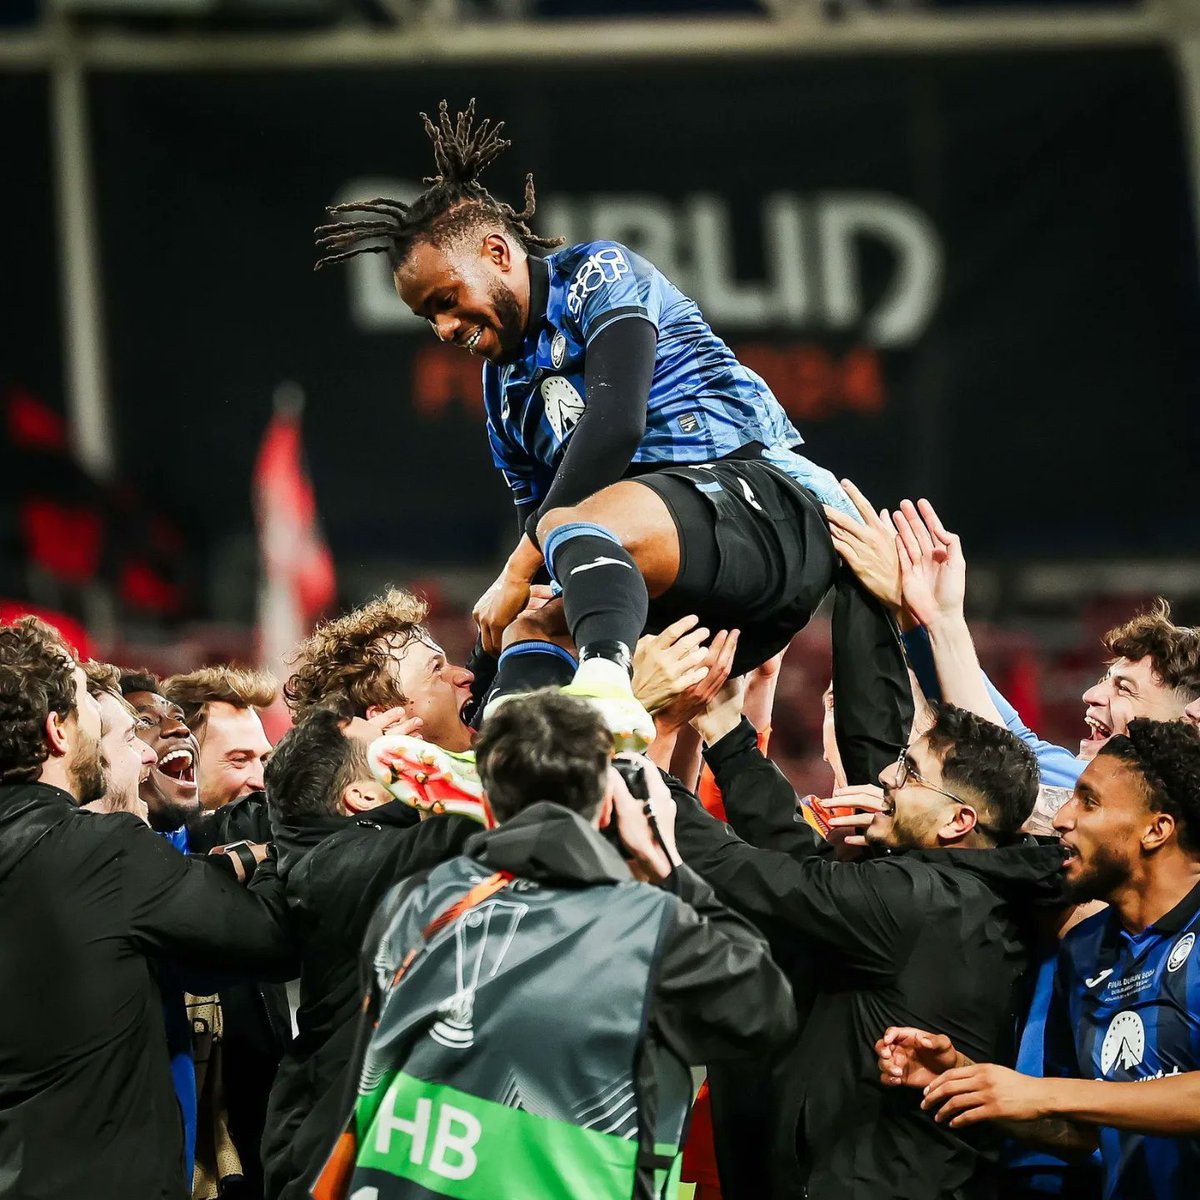 What a moment for @Alookman #uel